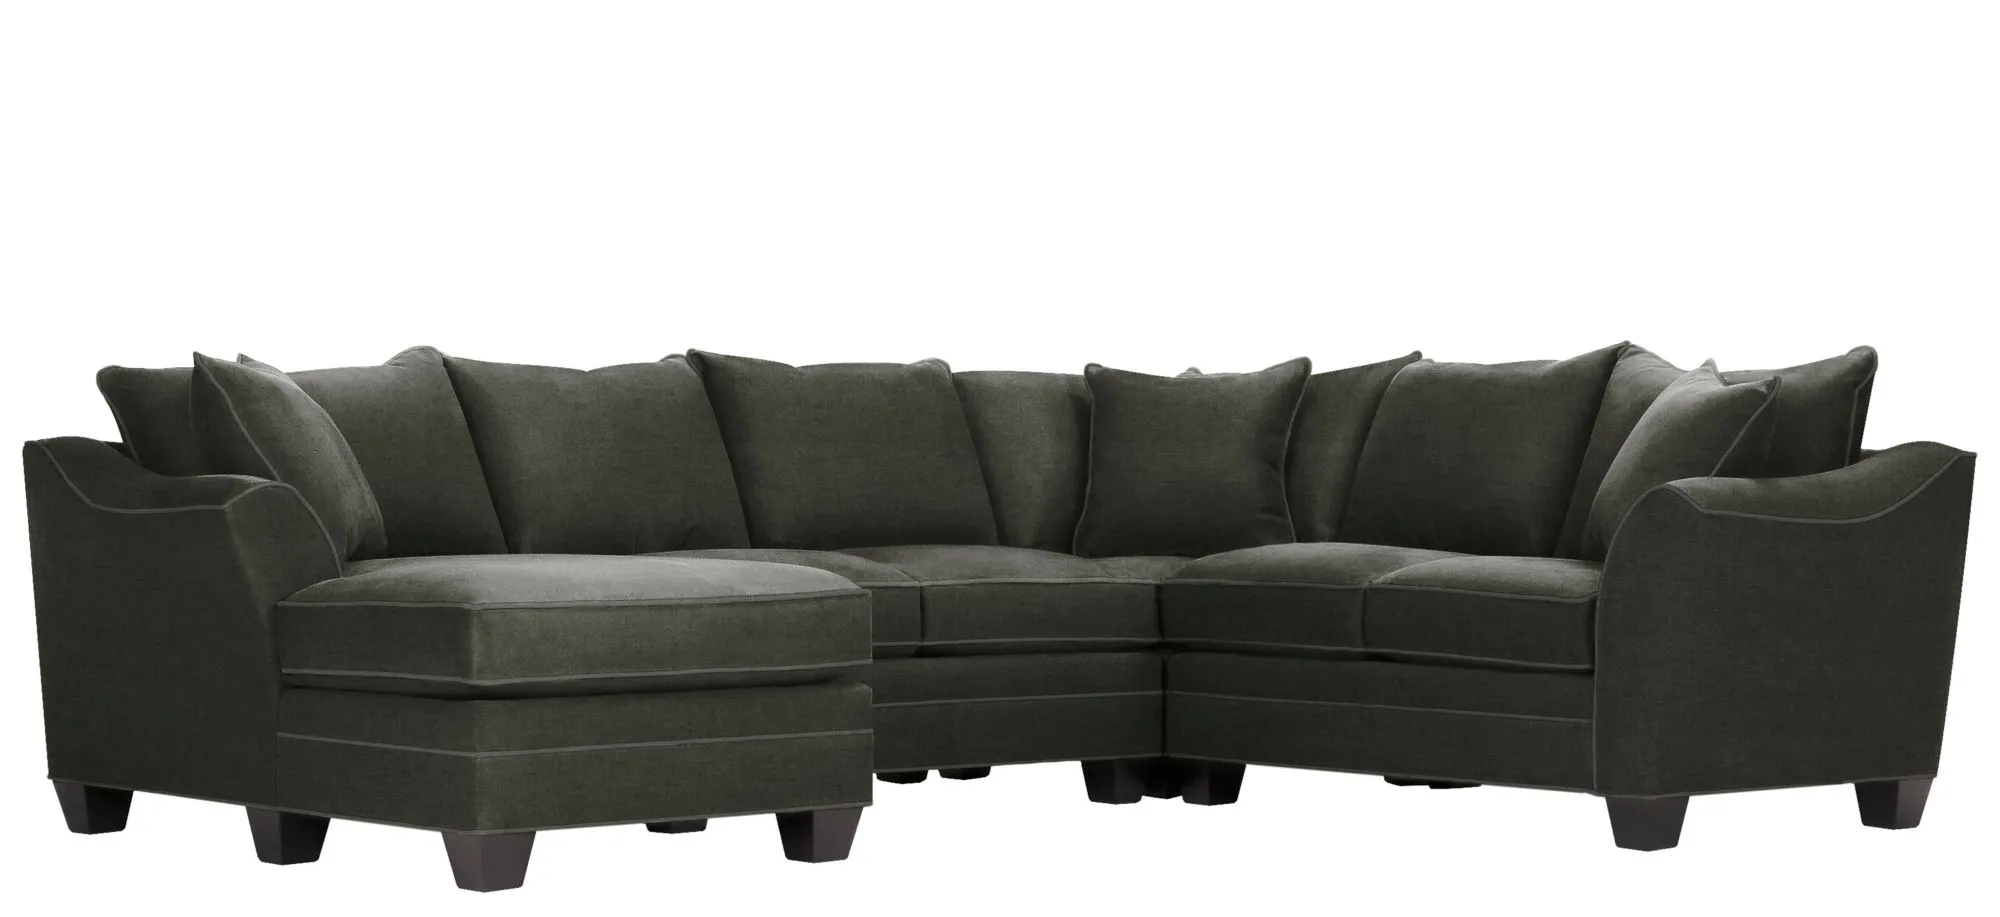 Foresthill 4-pc. Left Hand Chaise Sectional Sofa in Santa Rosa Slate by H.M. Richards